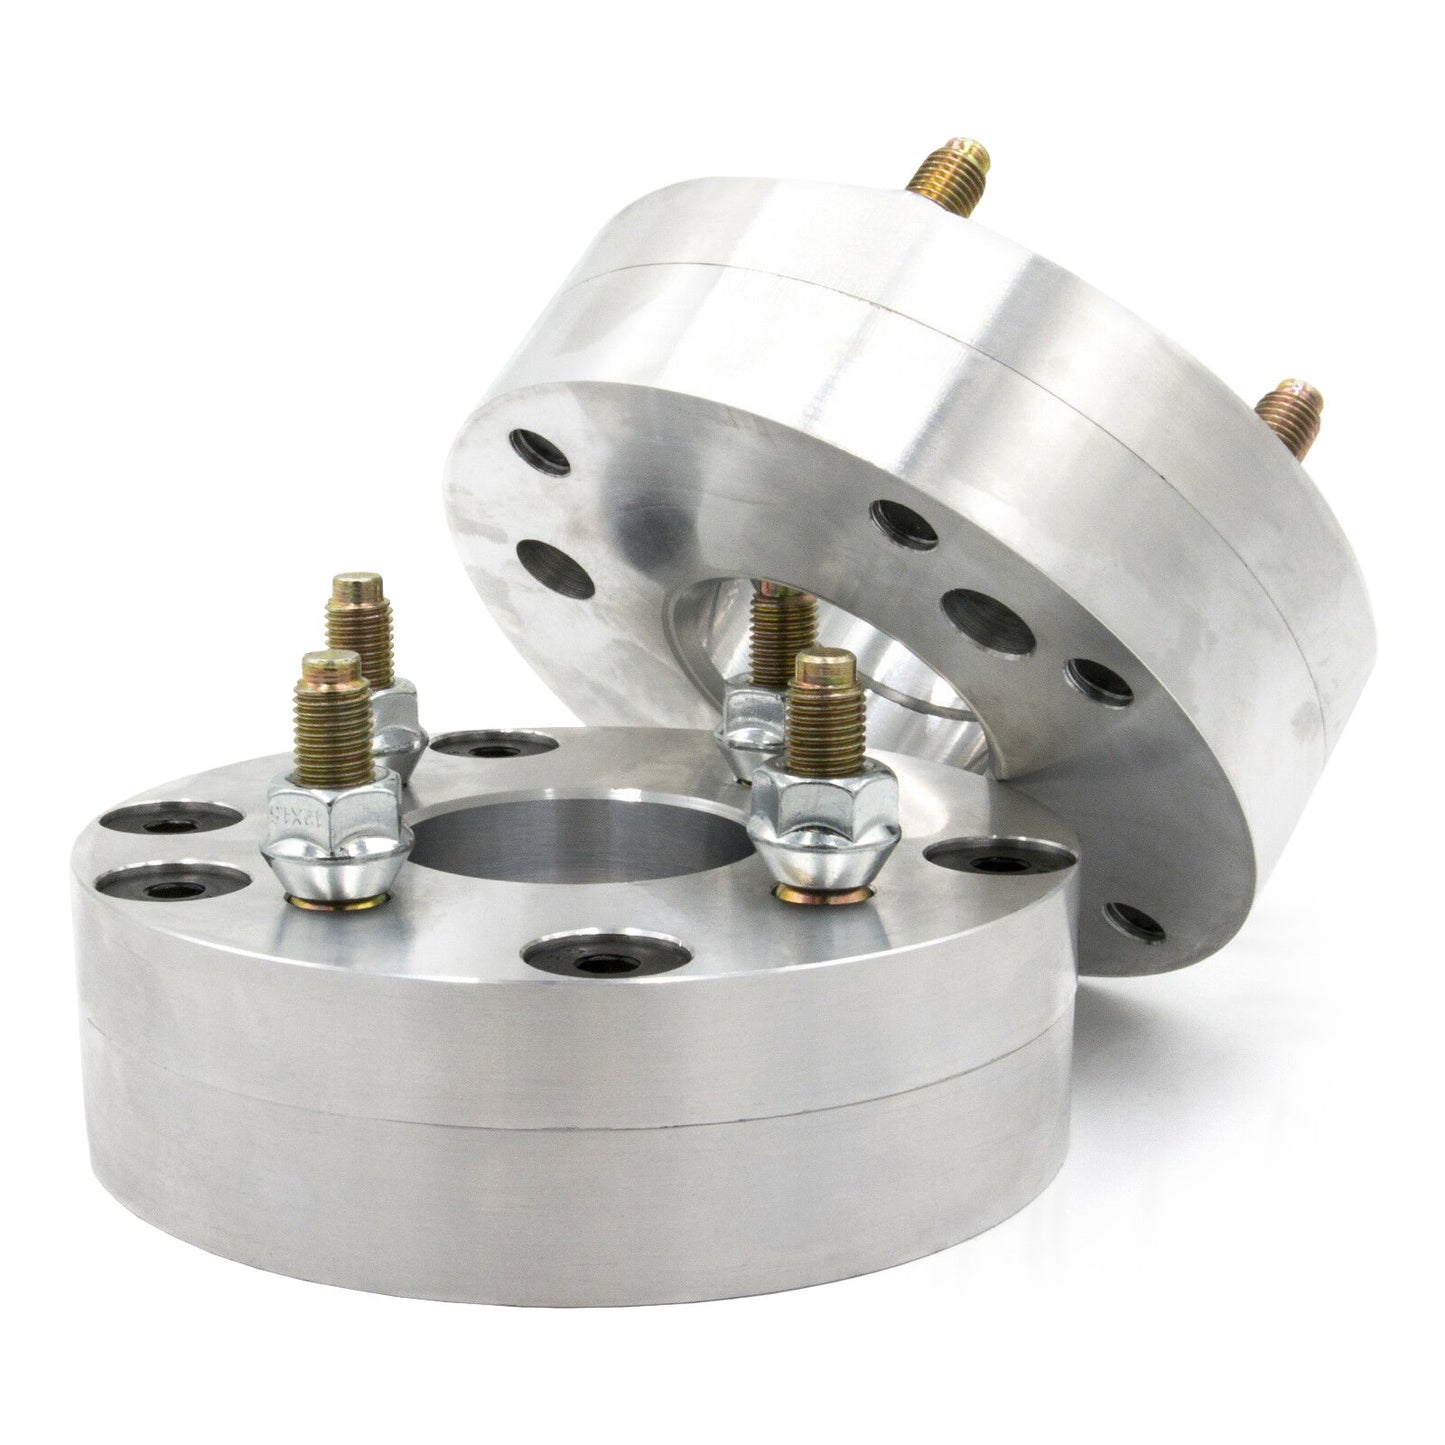 3x112 to 4x100 2 piece Wheel Adapter - Thickness: 1.5" - 3"